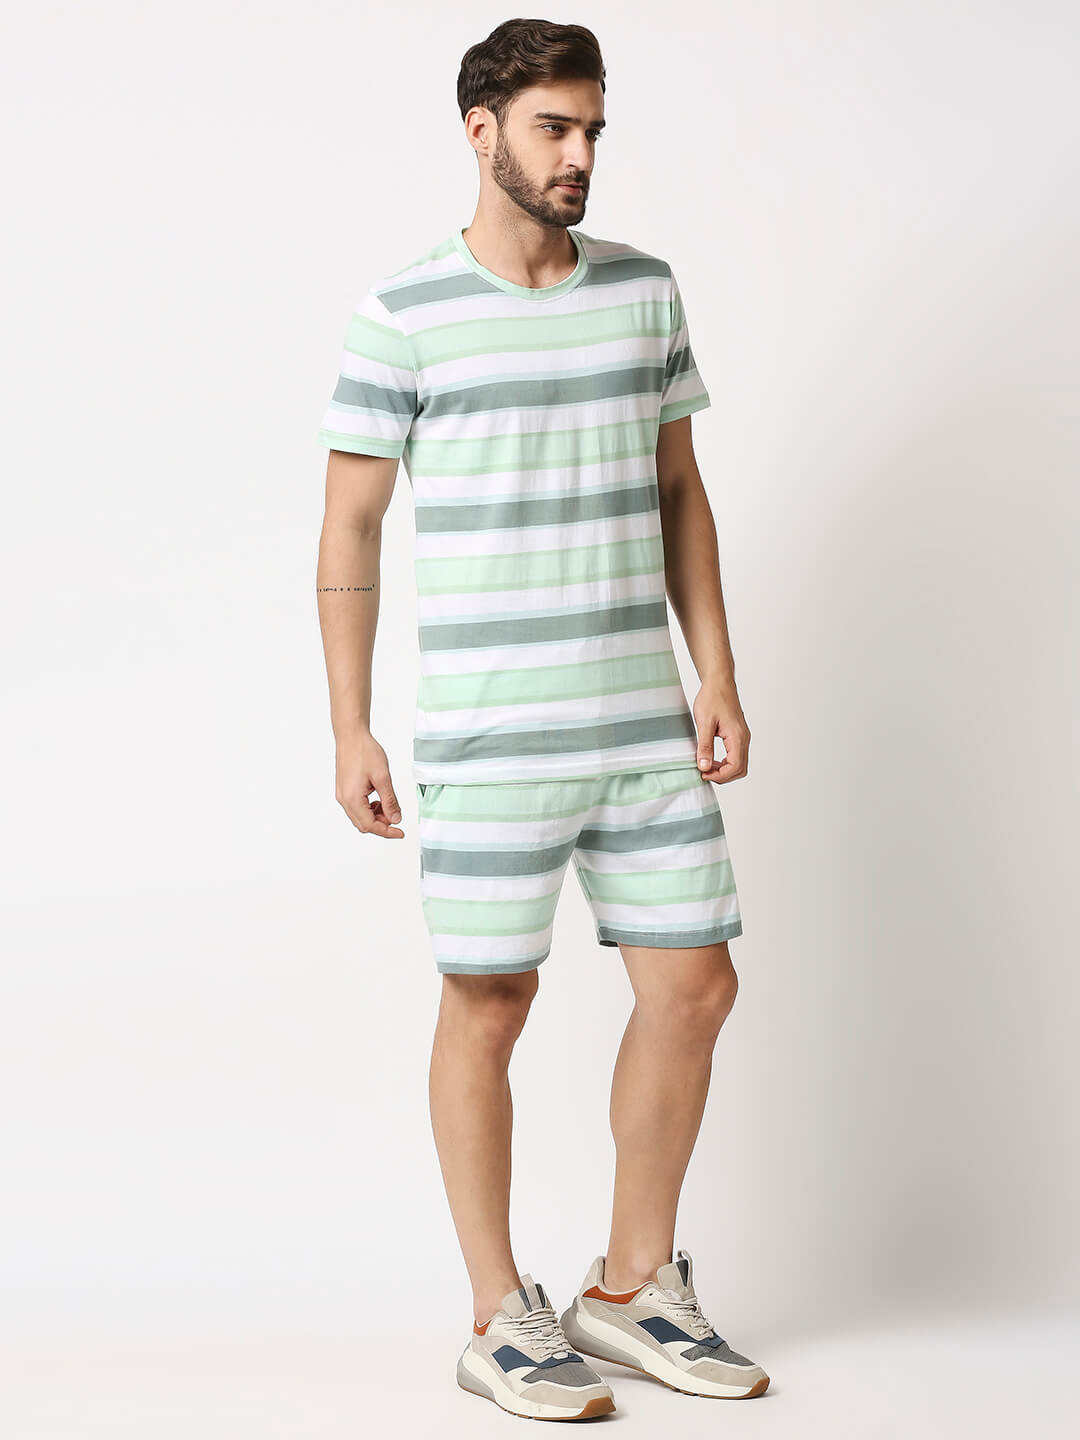 The Manaca Men Stripe Tee with Shorts - White & Peppermint